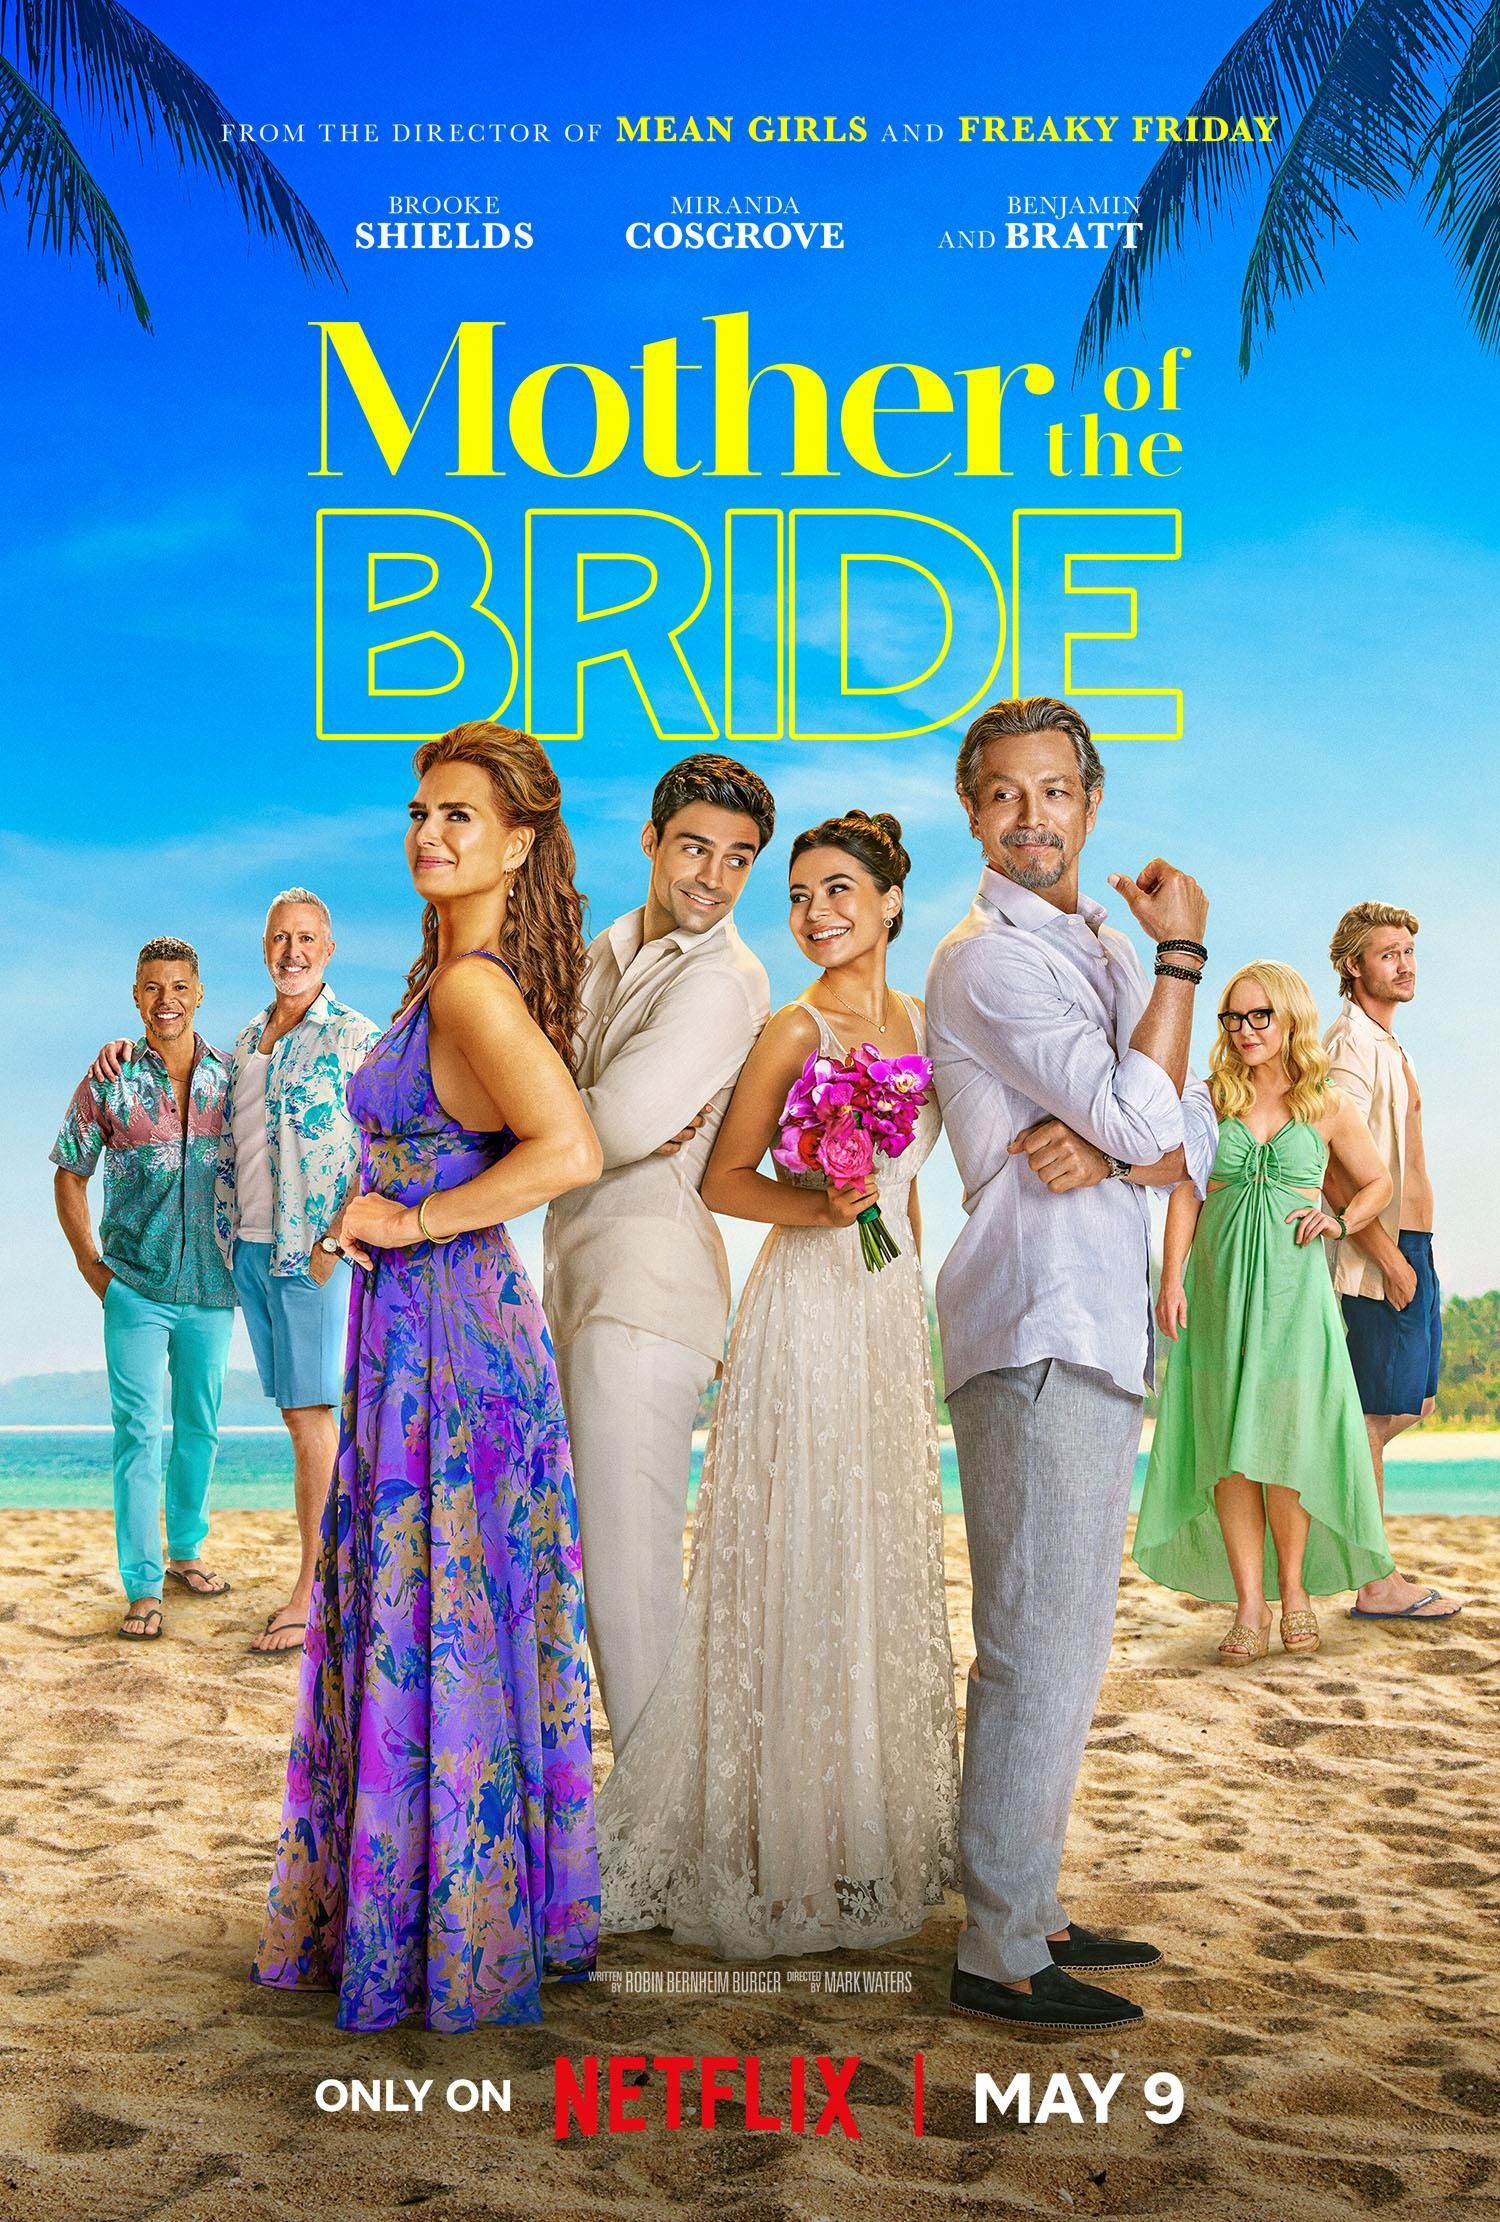 Mother of the Bride movie poster with Brook Shields, Miranda Cosgrove and Benjamin Bratt standing on the beach